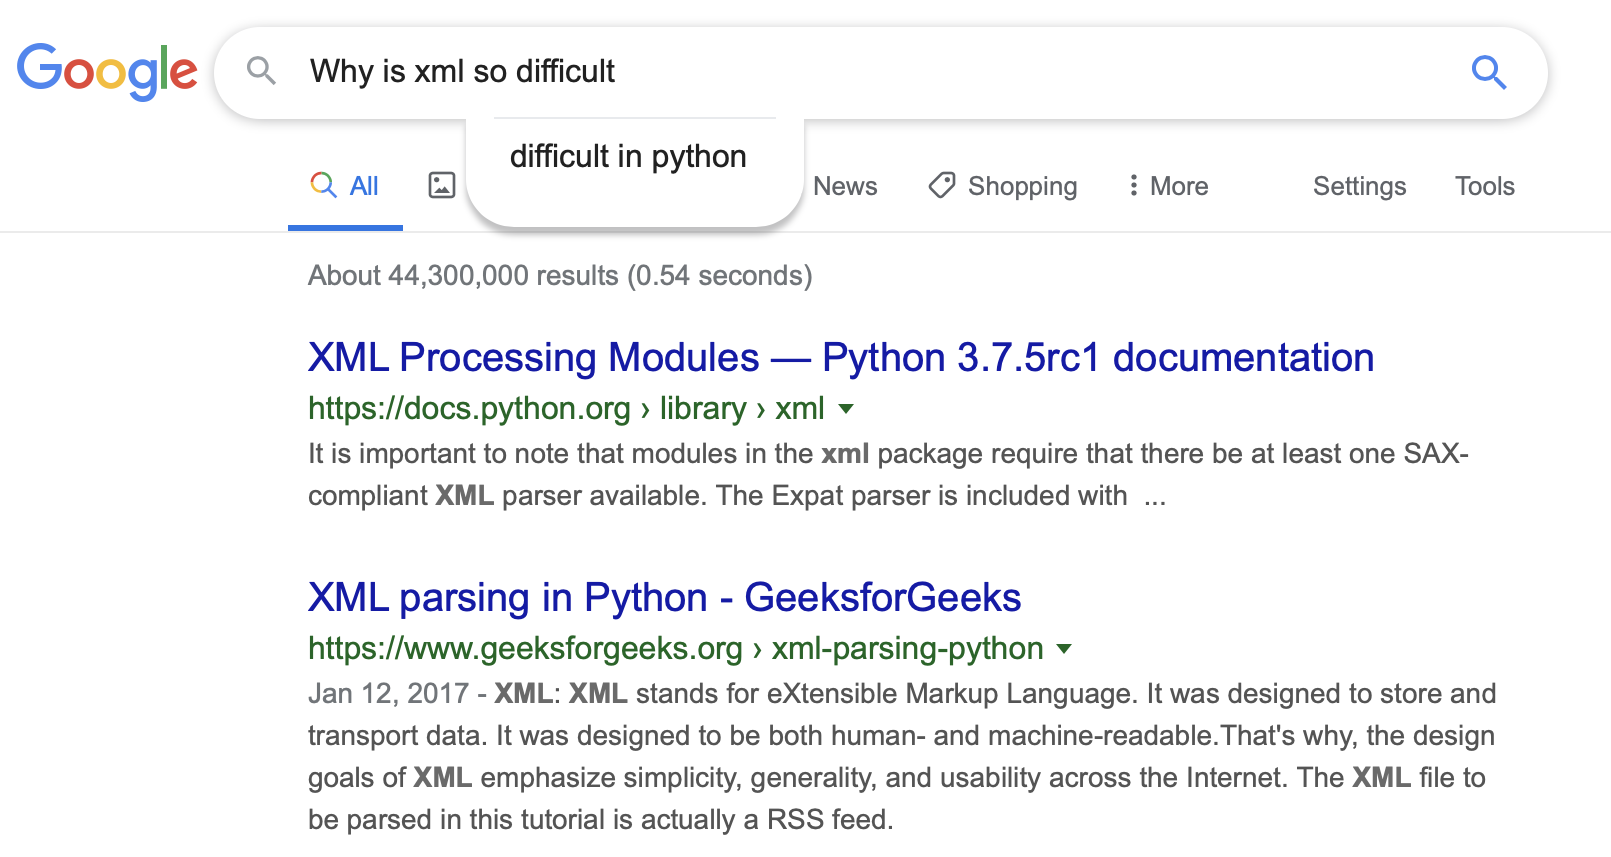 Why is XML so difficult in Python?: Why is XML so difficult… automatically extends to “in Python”.; Python; XML; Google